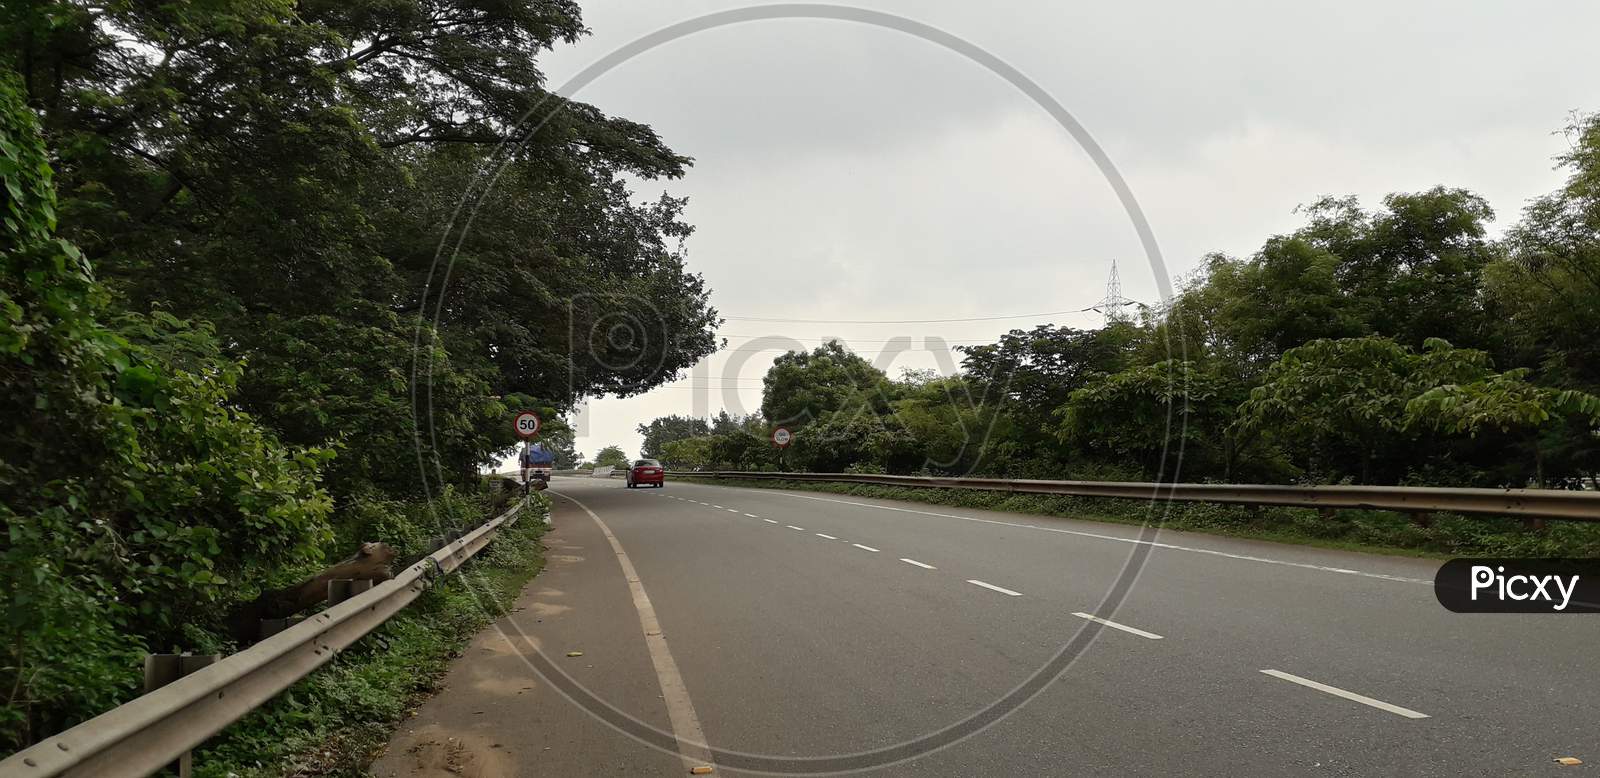 Indian street, sky, trees, Cloudy, city road, highway, road marking, bicycle line, car, Cuttack, India